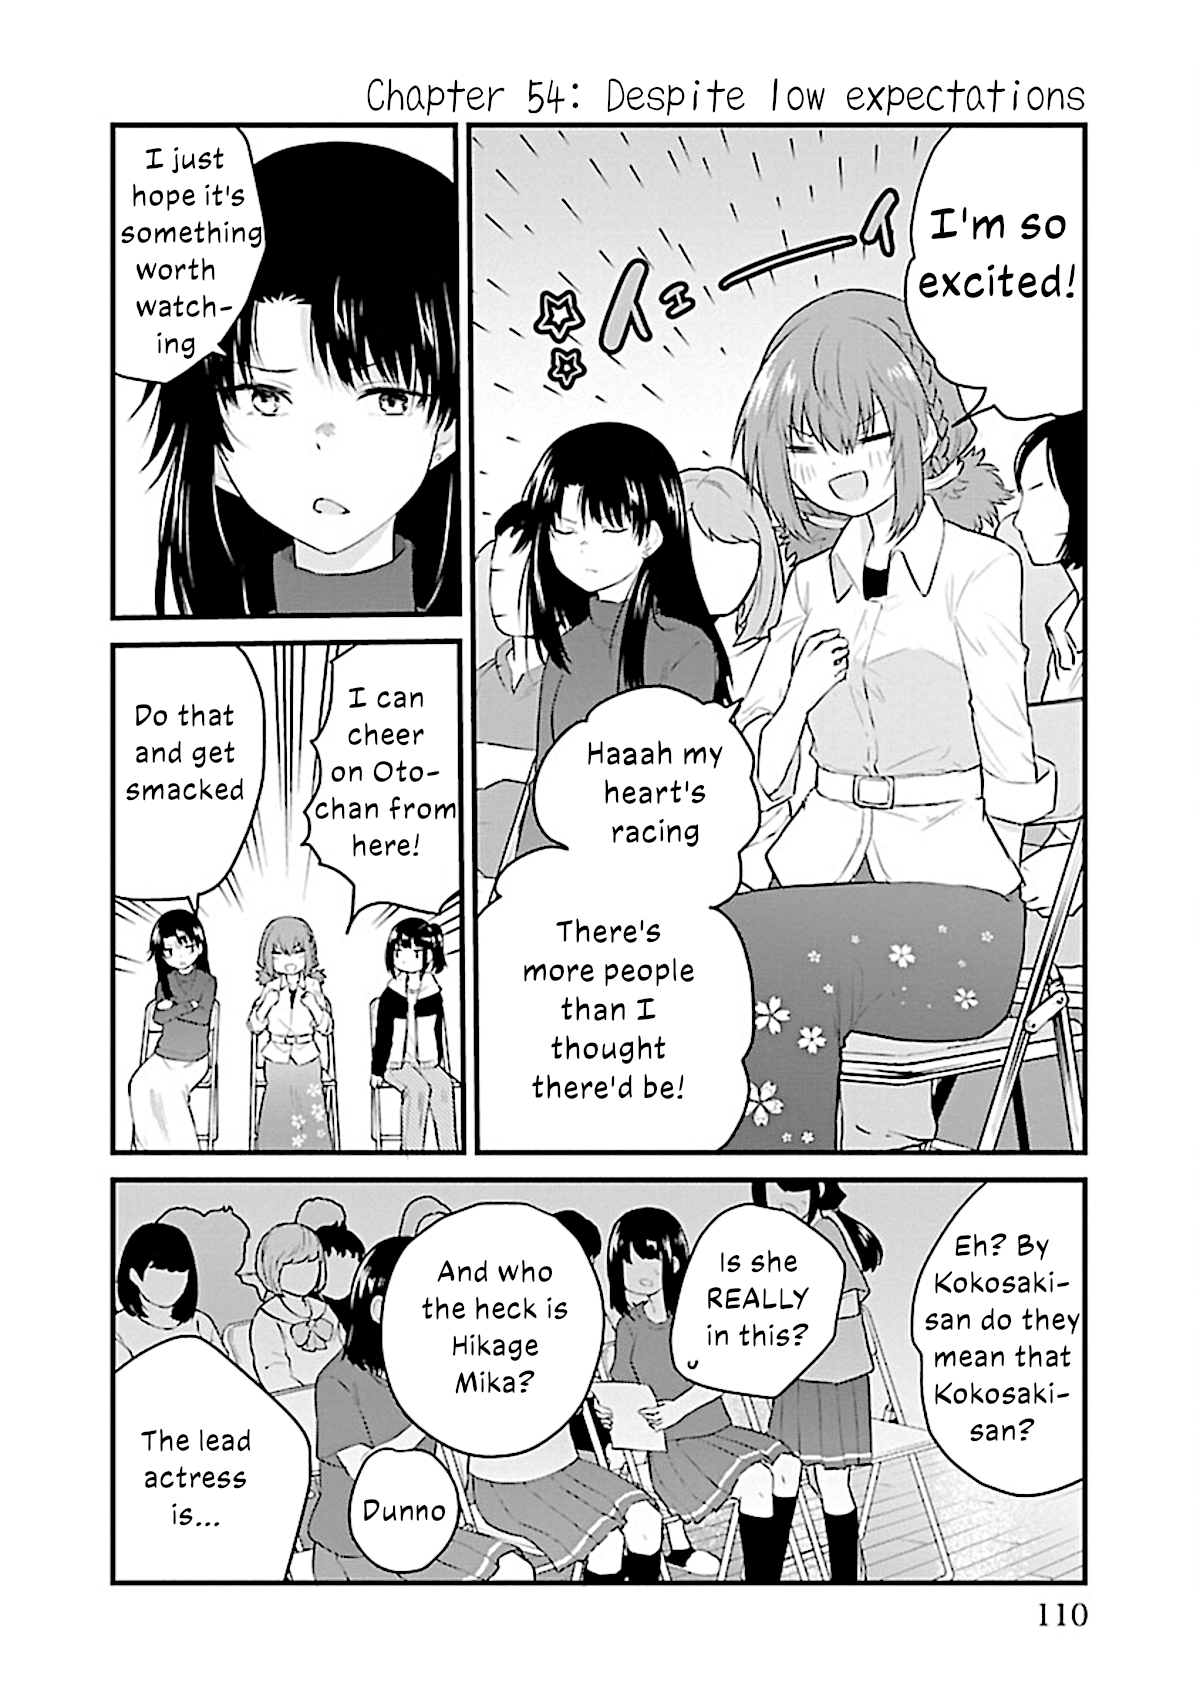 The Mute Girl And Her New Friend (Serialization) Vol.4 Chapter 54: Despite Low Expectations - Picture 2